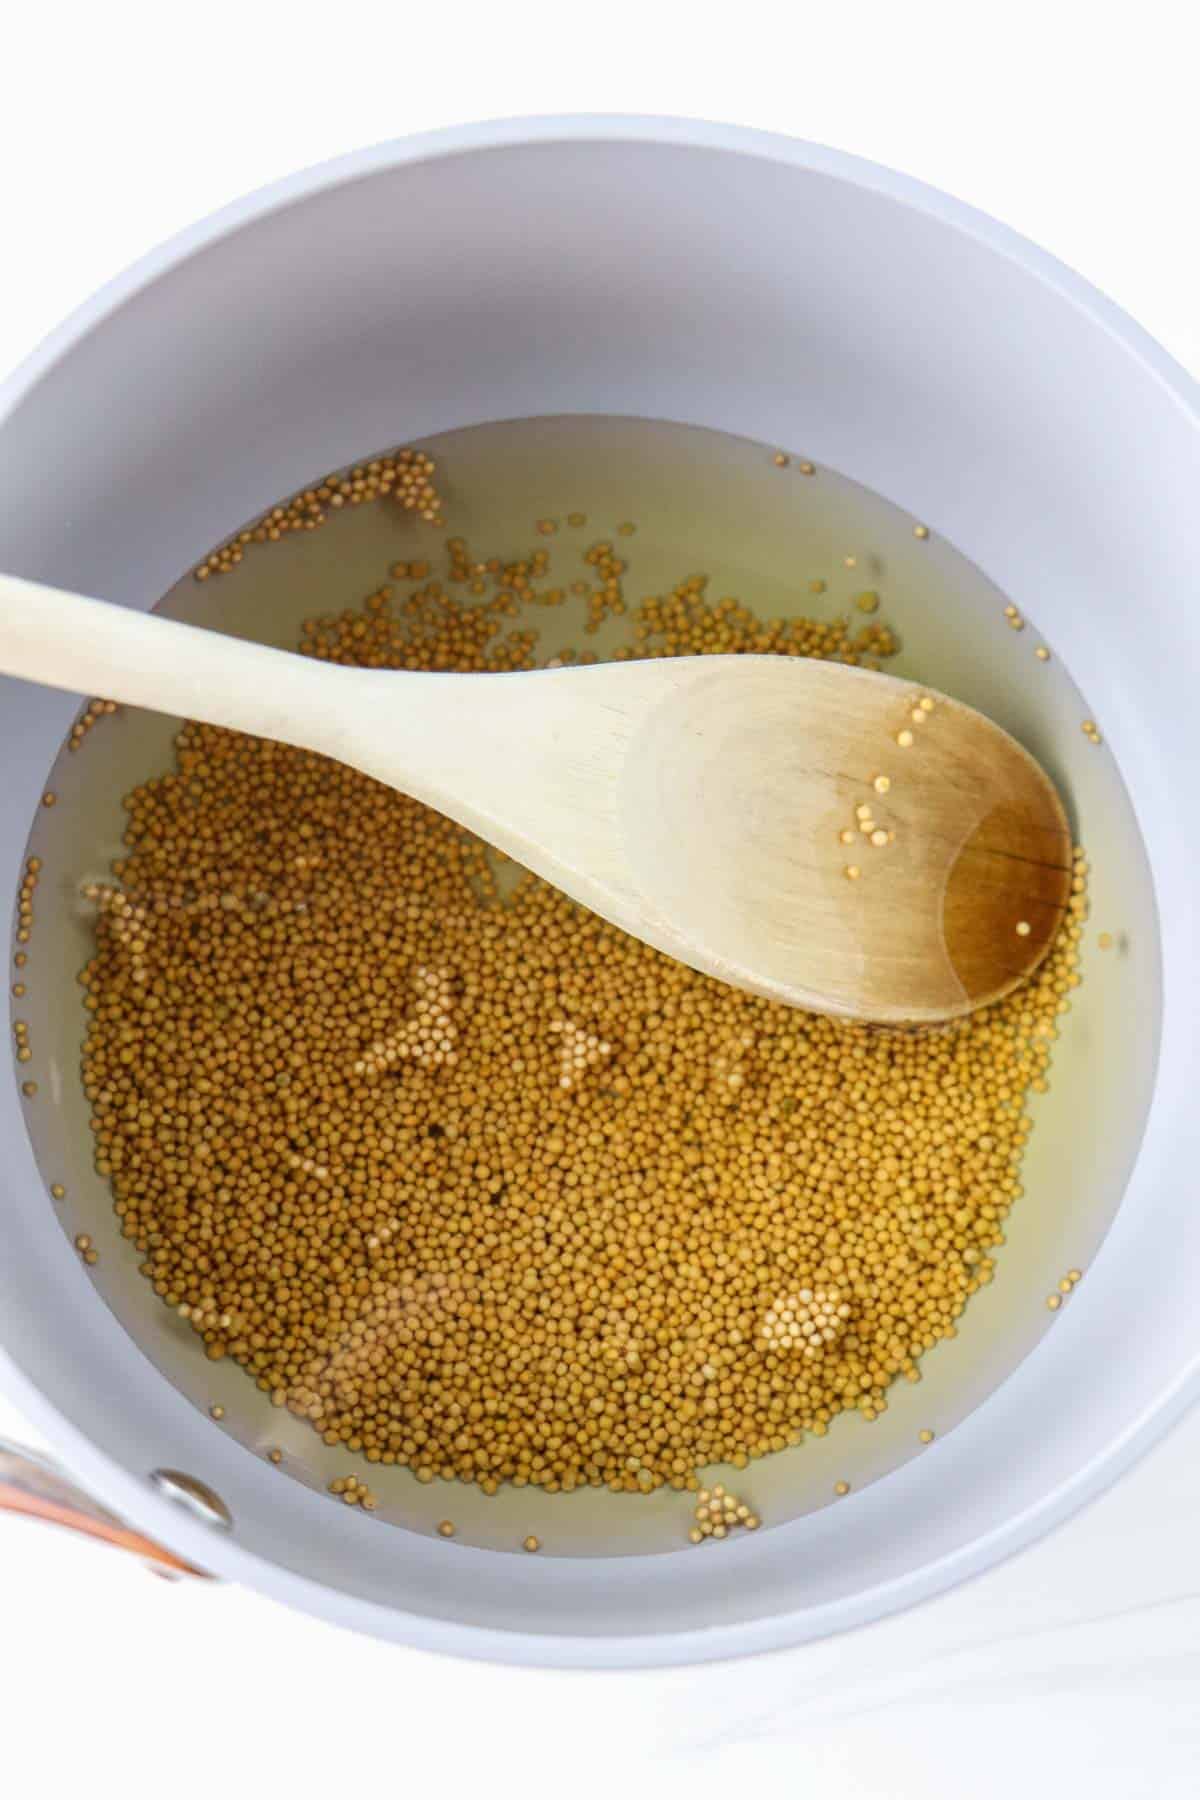 Mustard seeds in a pan with water and a wooden spoon.